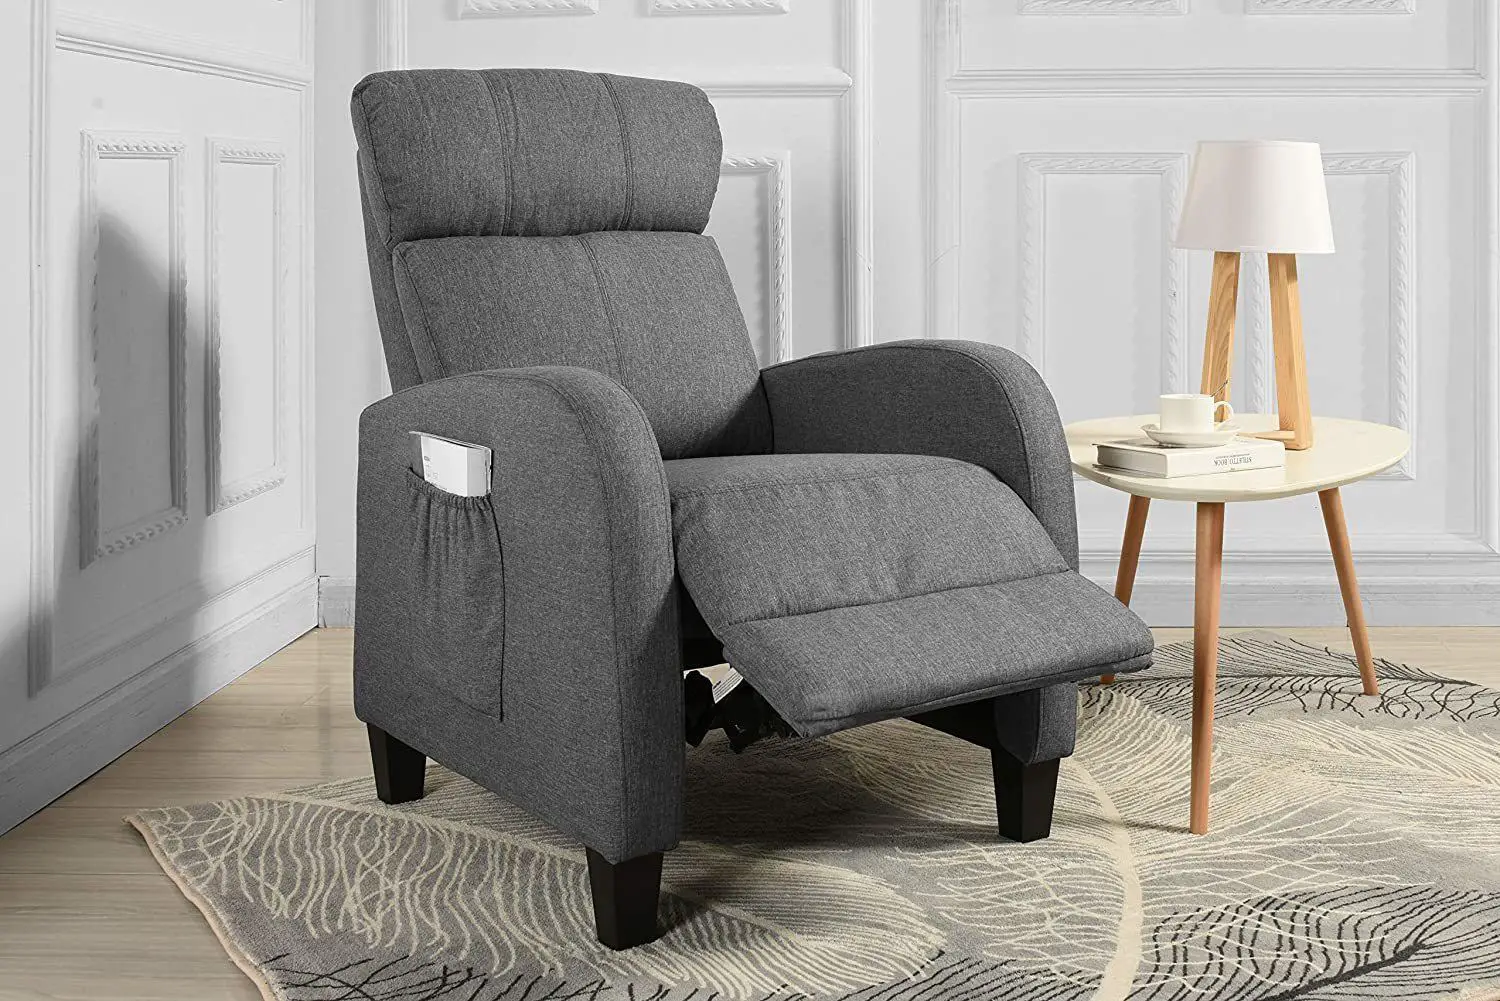 Best Living Room Chairs For Back Pain